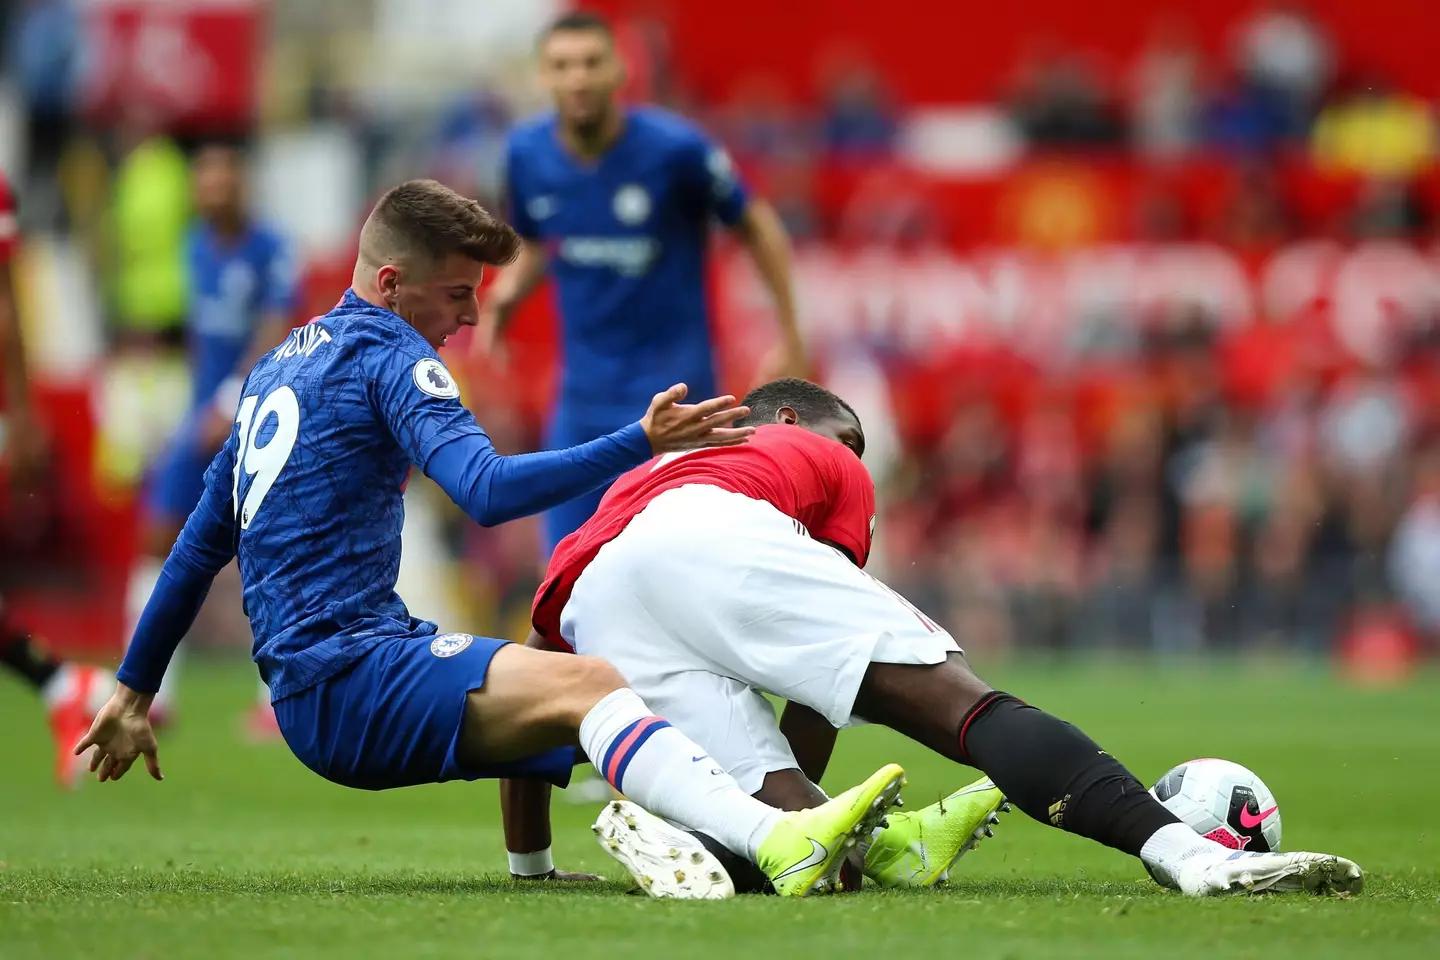 Mason Mount in action for Chelsea against Manchester United. Image: Alamy 